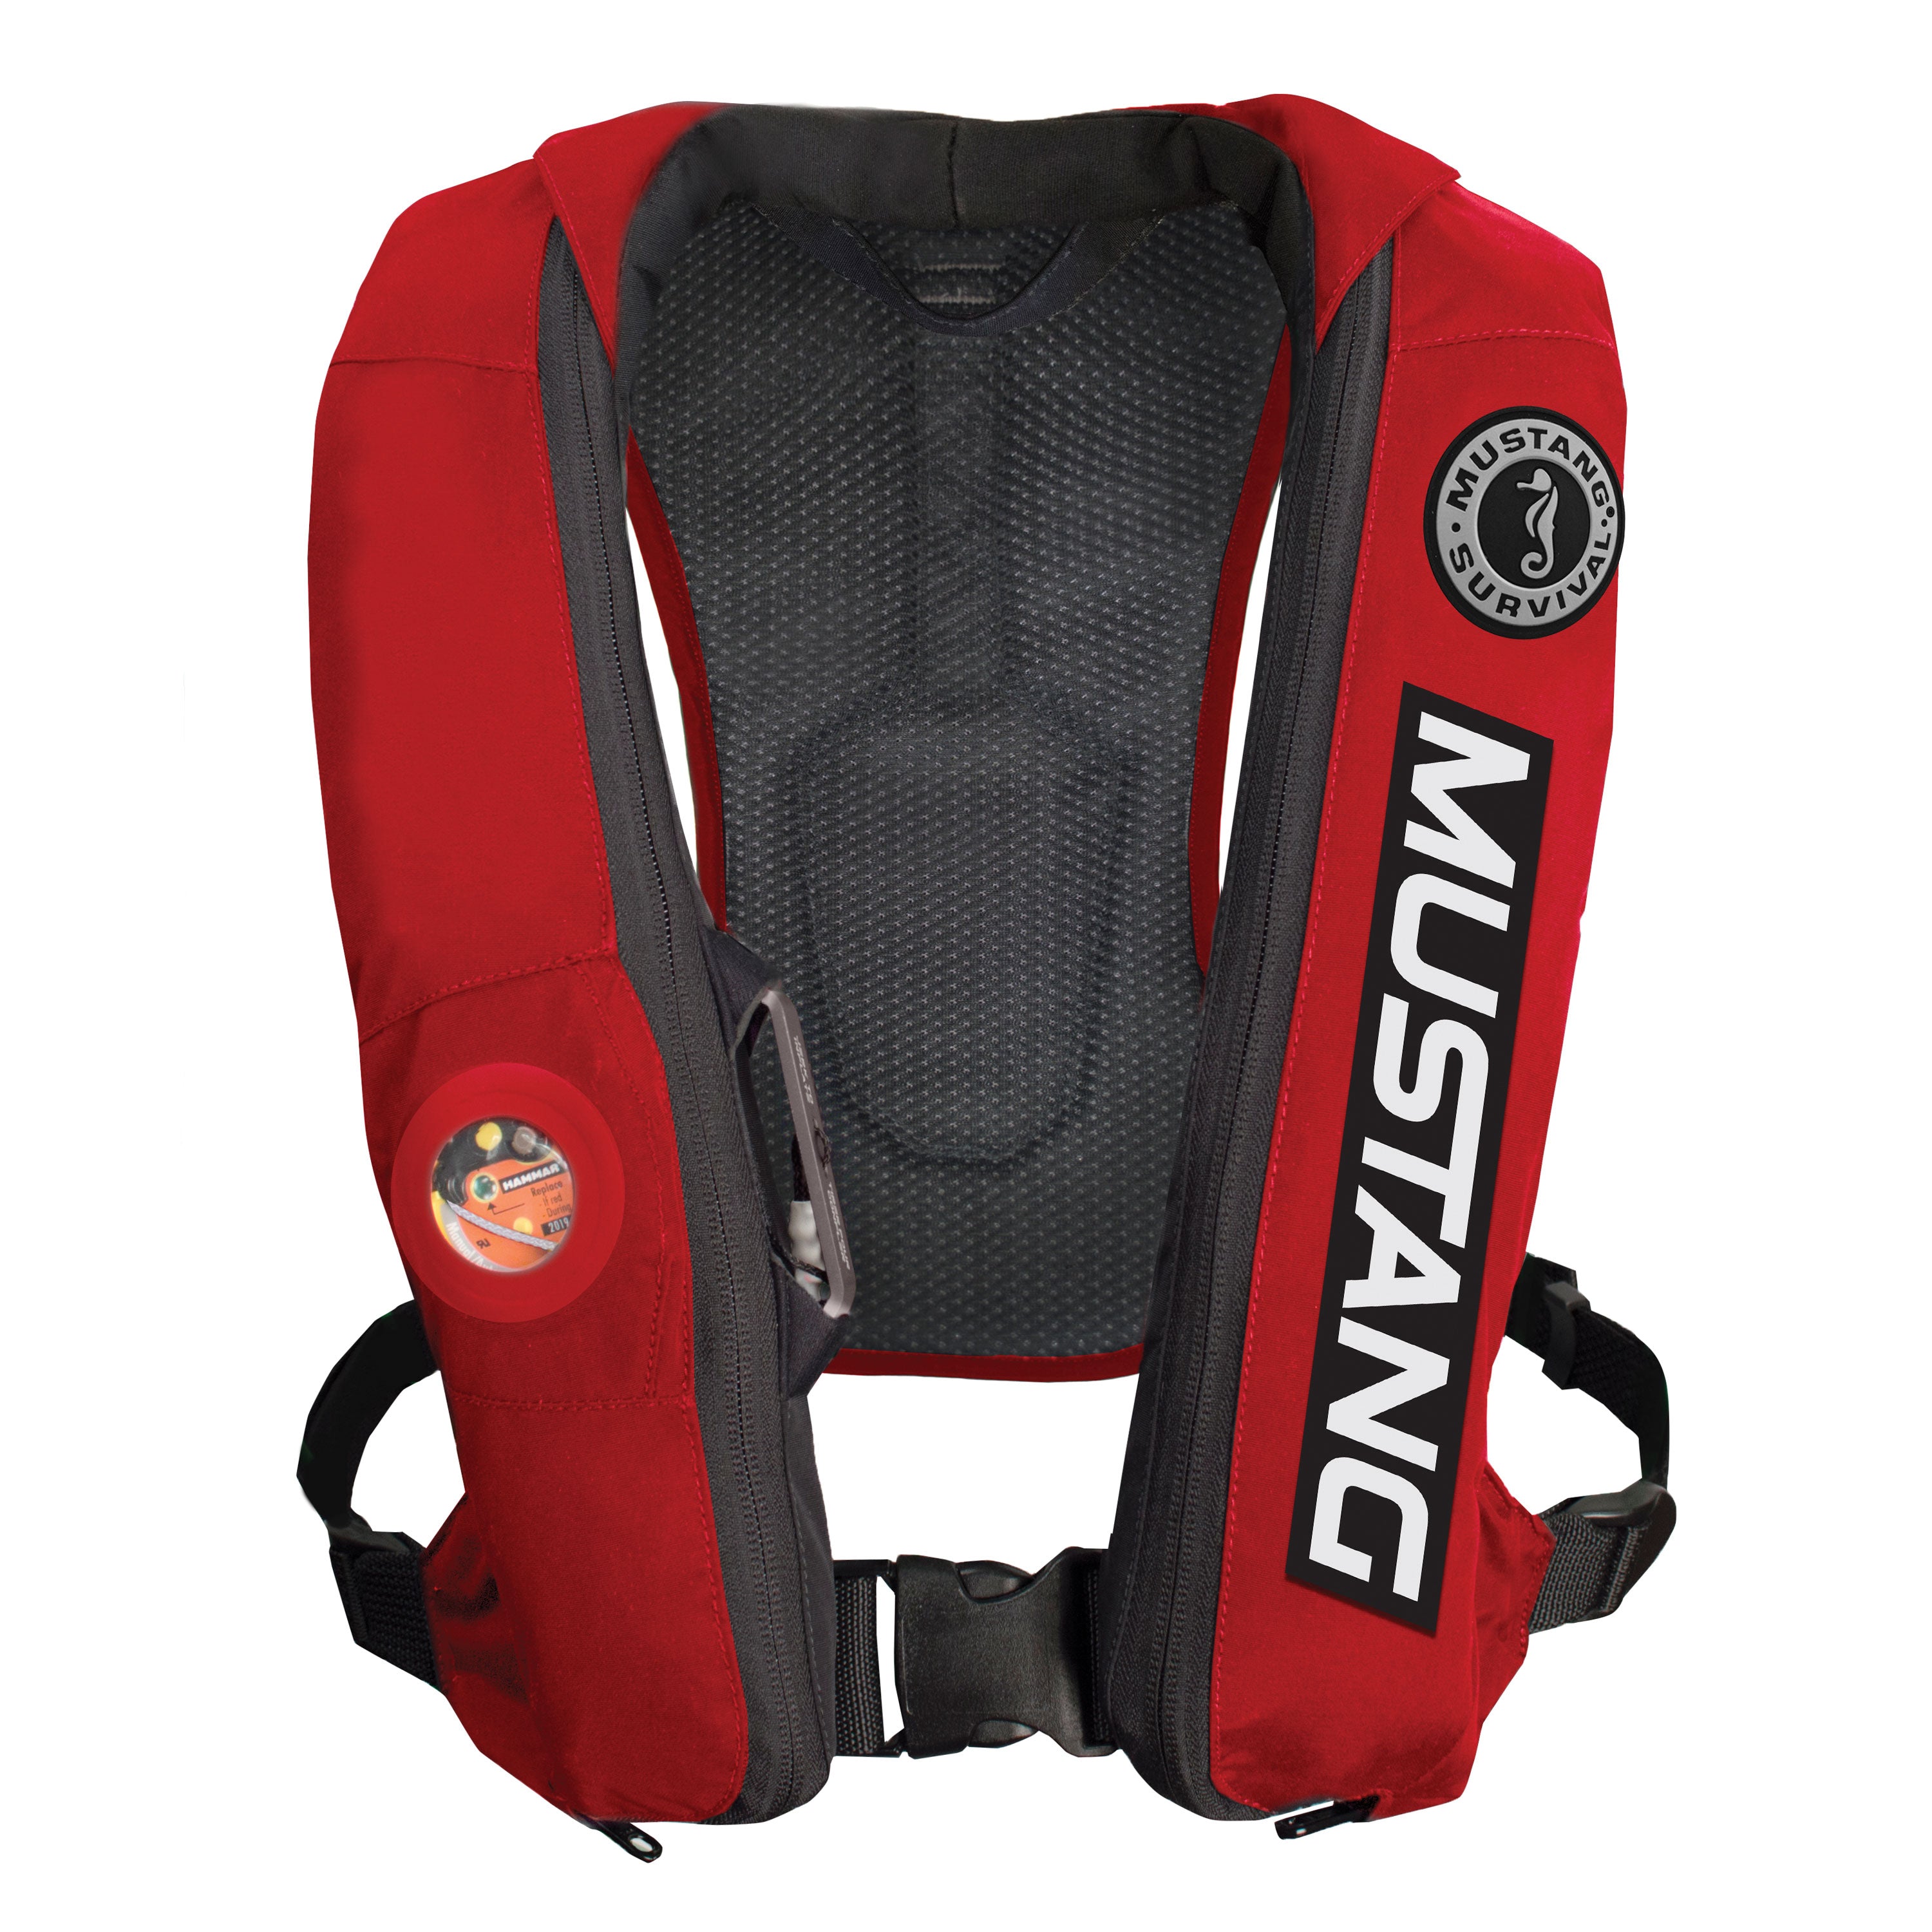 Mustang Survival MD518313 Elite 28 Inflatable PFD Auto Hydrostatic - Black